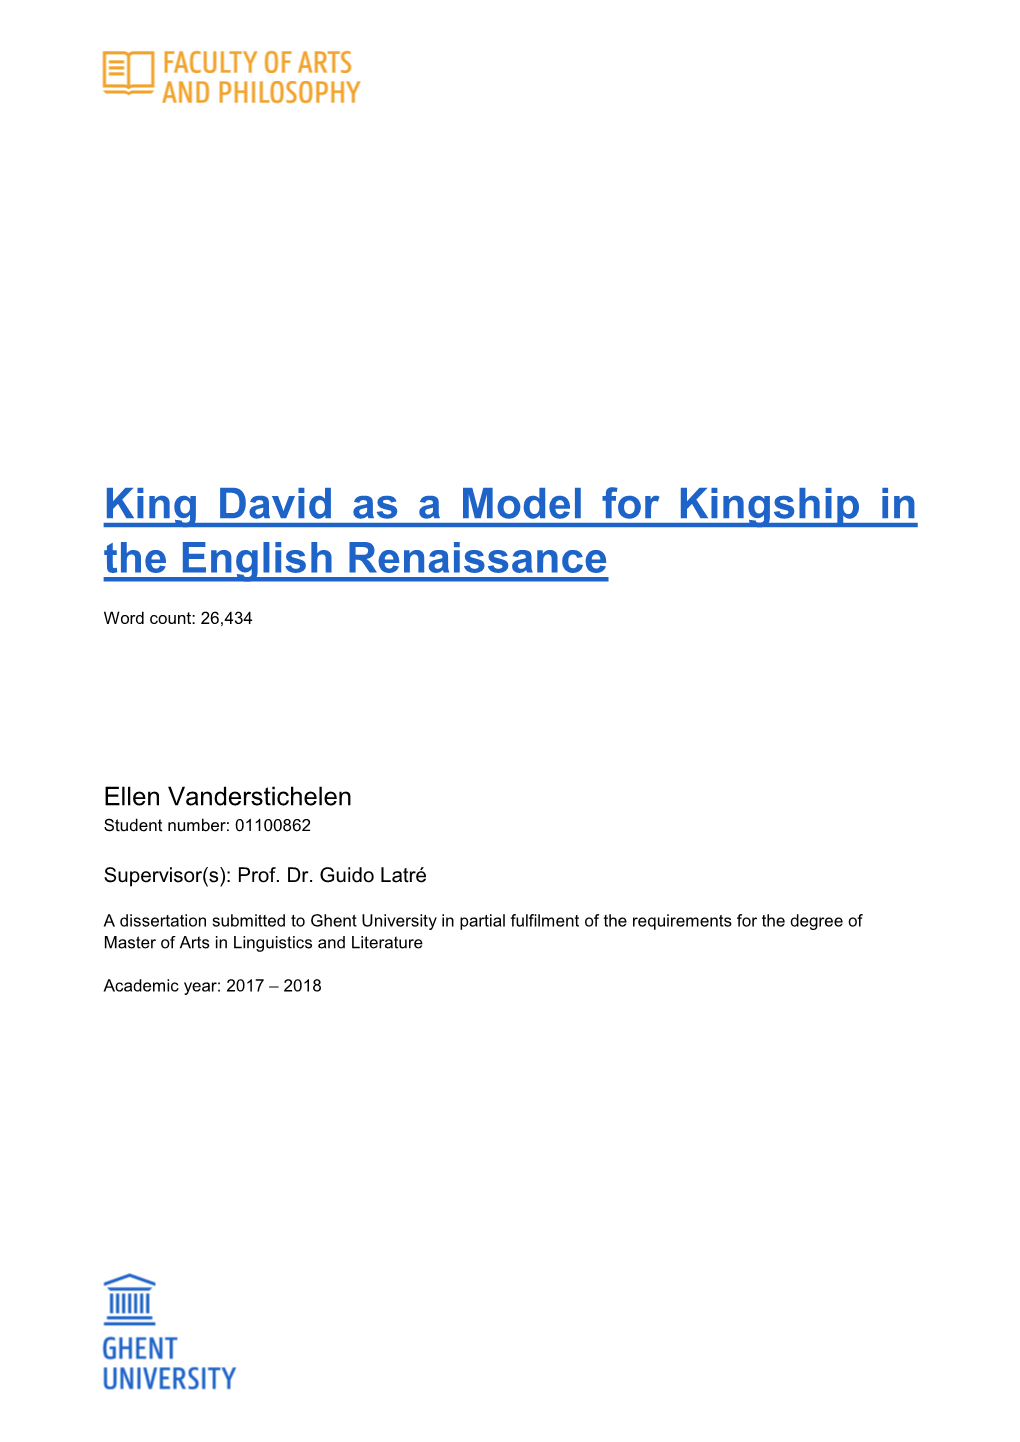 King David As a Model for Kingship in the English Renaissance